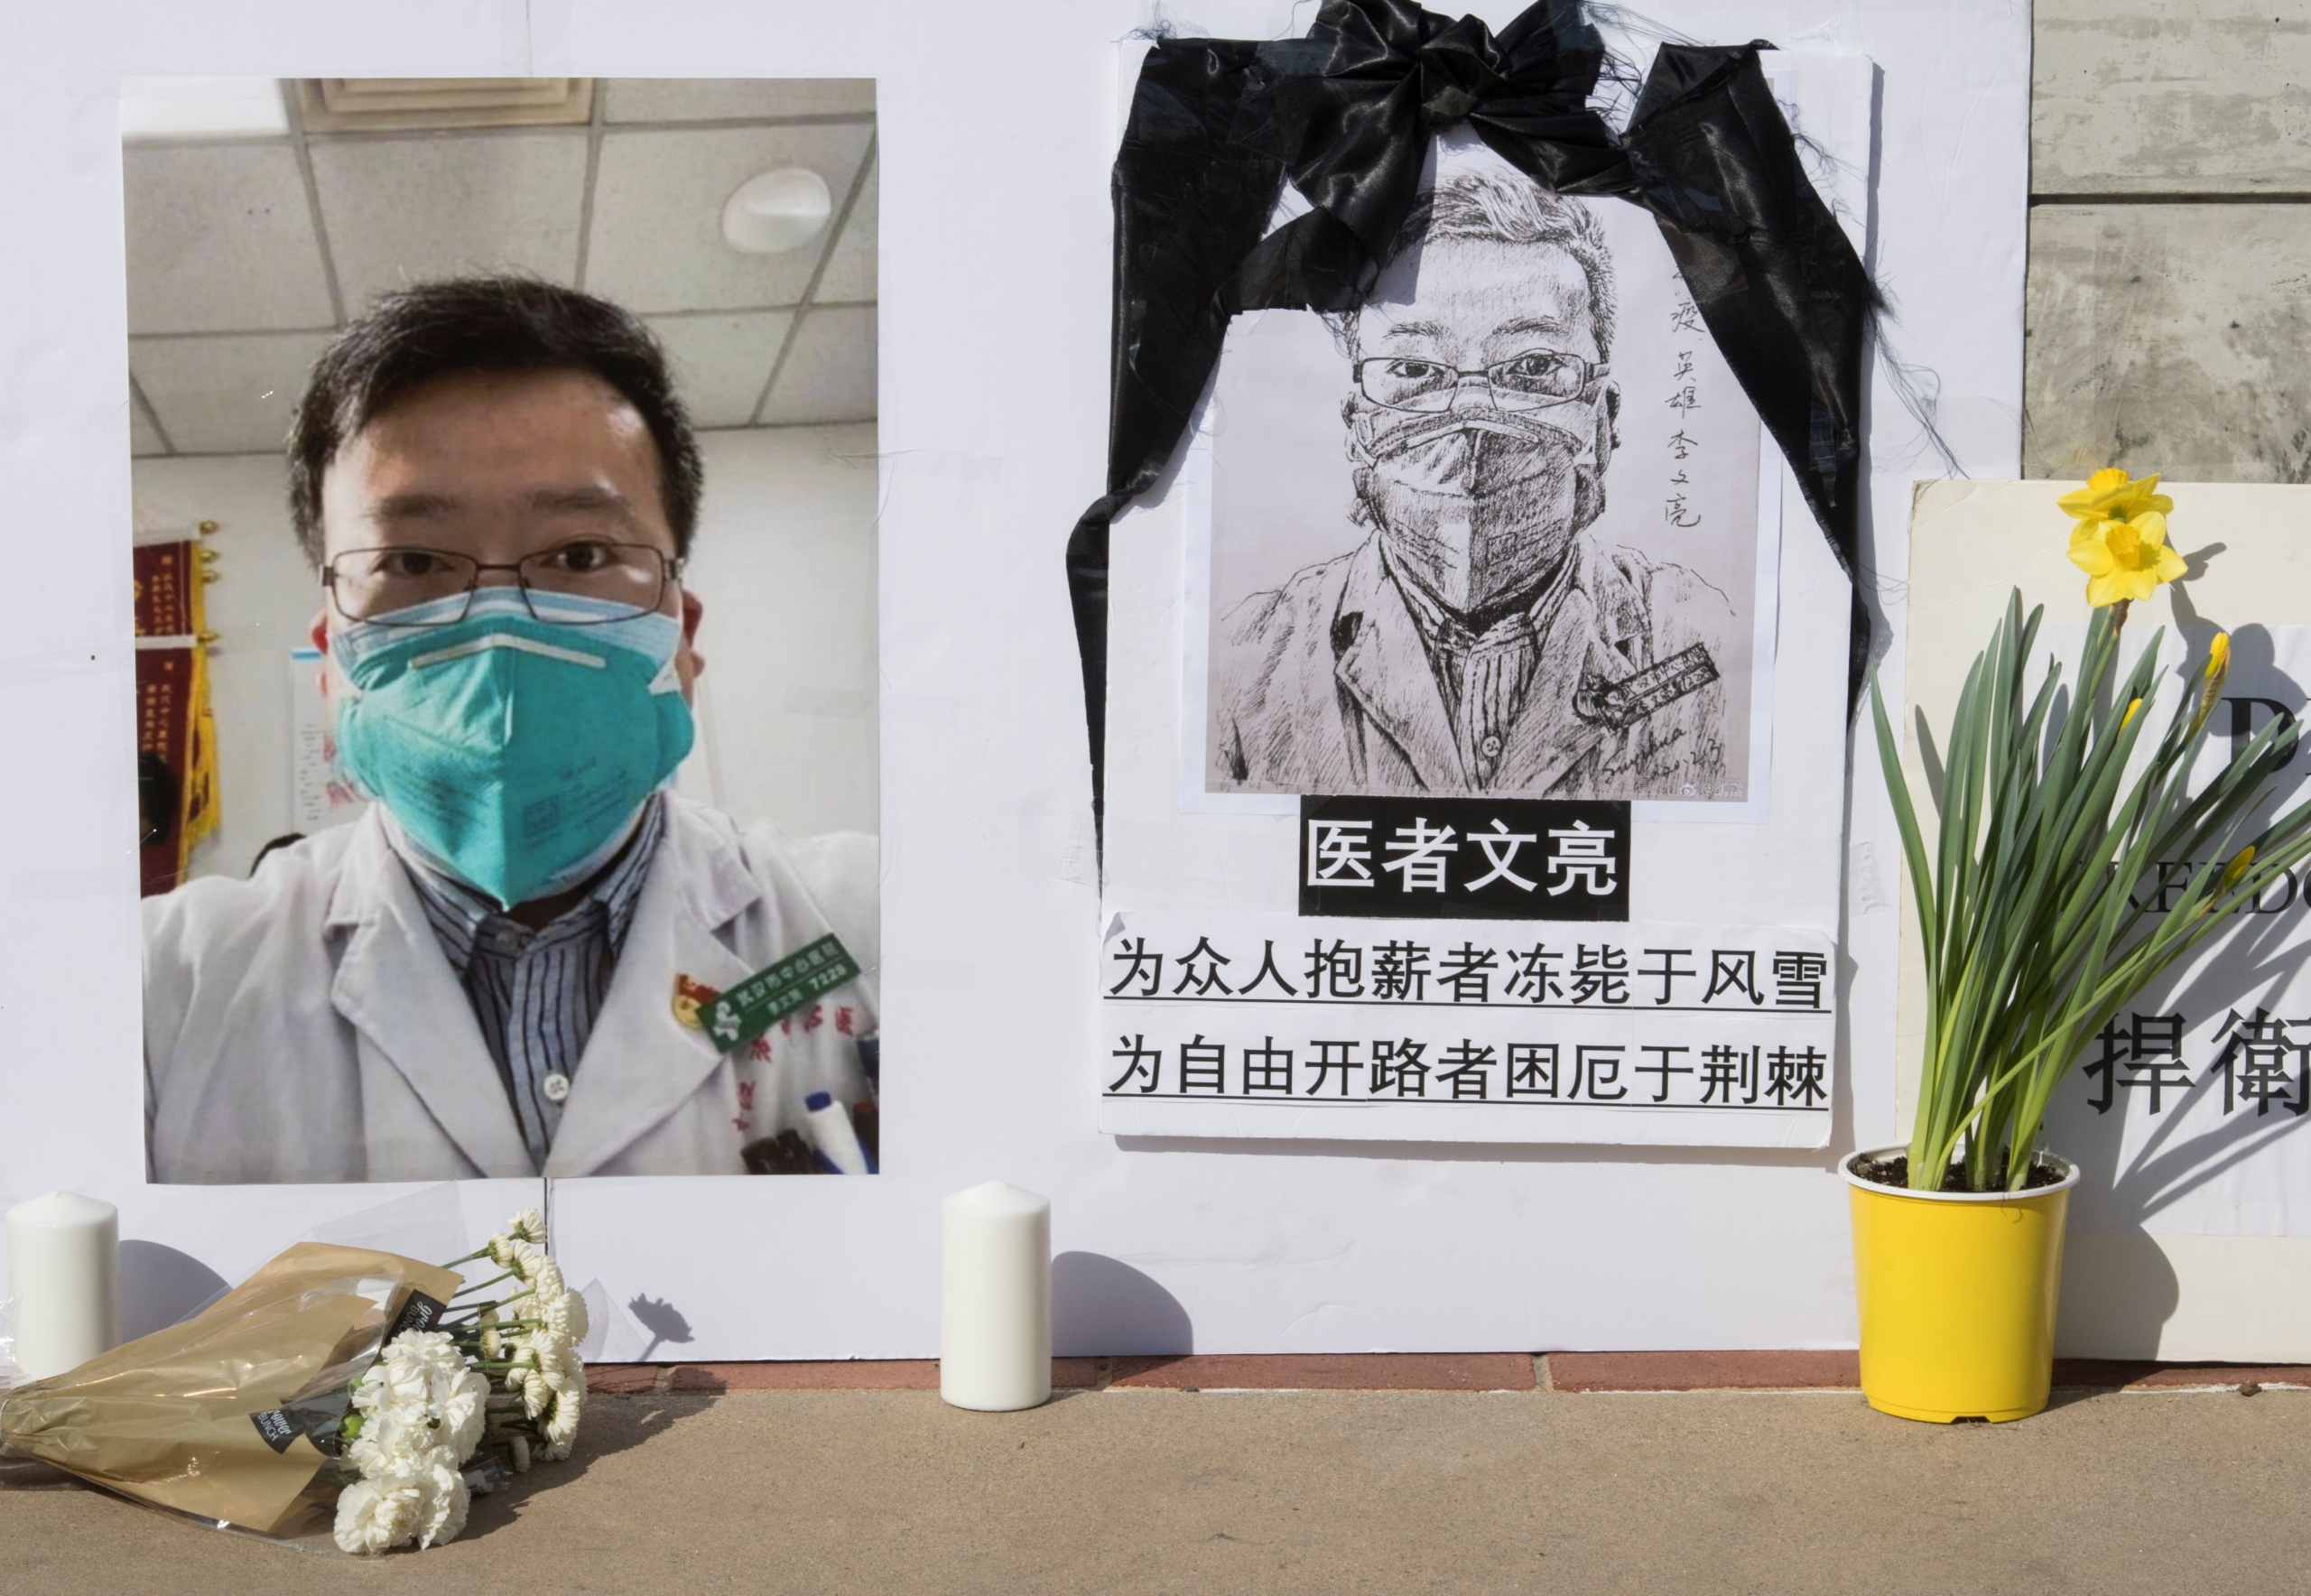 Wuhan Residents Remember Coronavirus ‘Whistleblower’ Doctor a Year After His Death